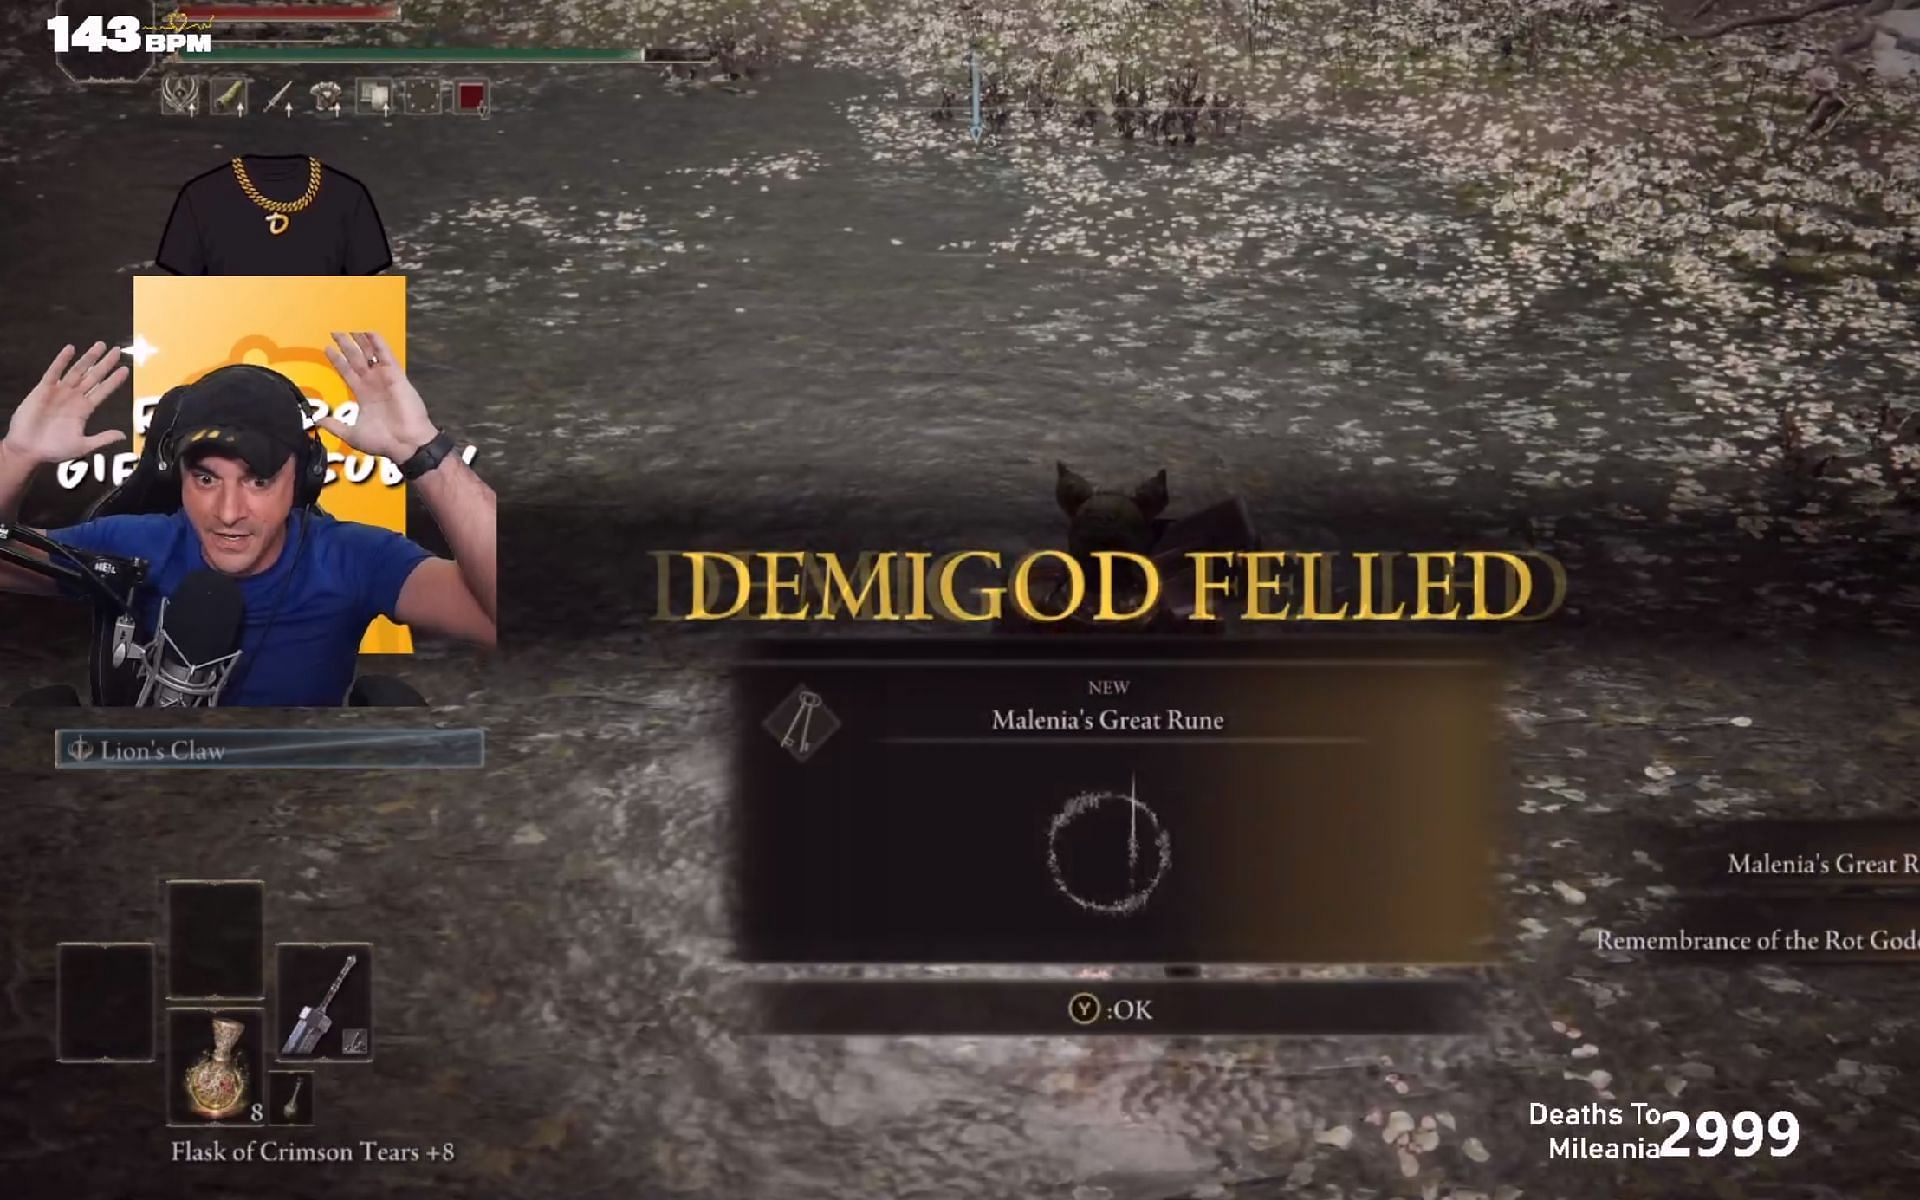 Dan Gheesling has defeated Malenia, Blade of Miquella, after dying 2,999 times to the boss (Image via DanGheesling/Twitch)